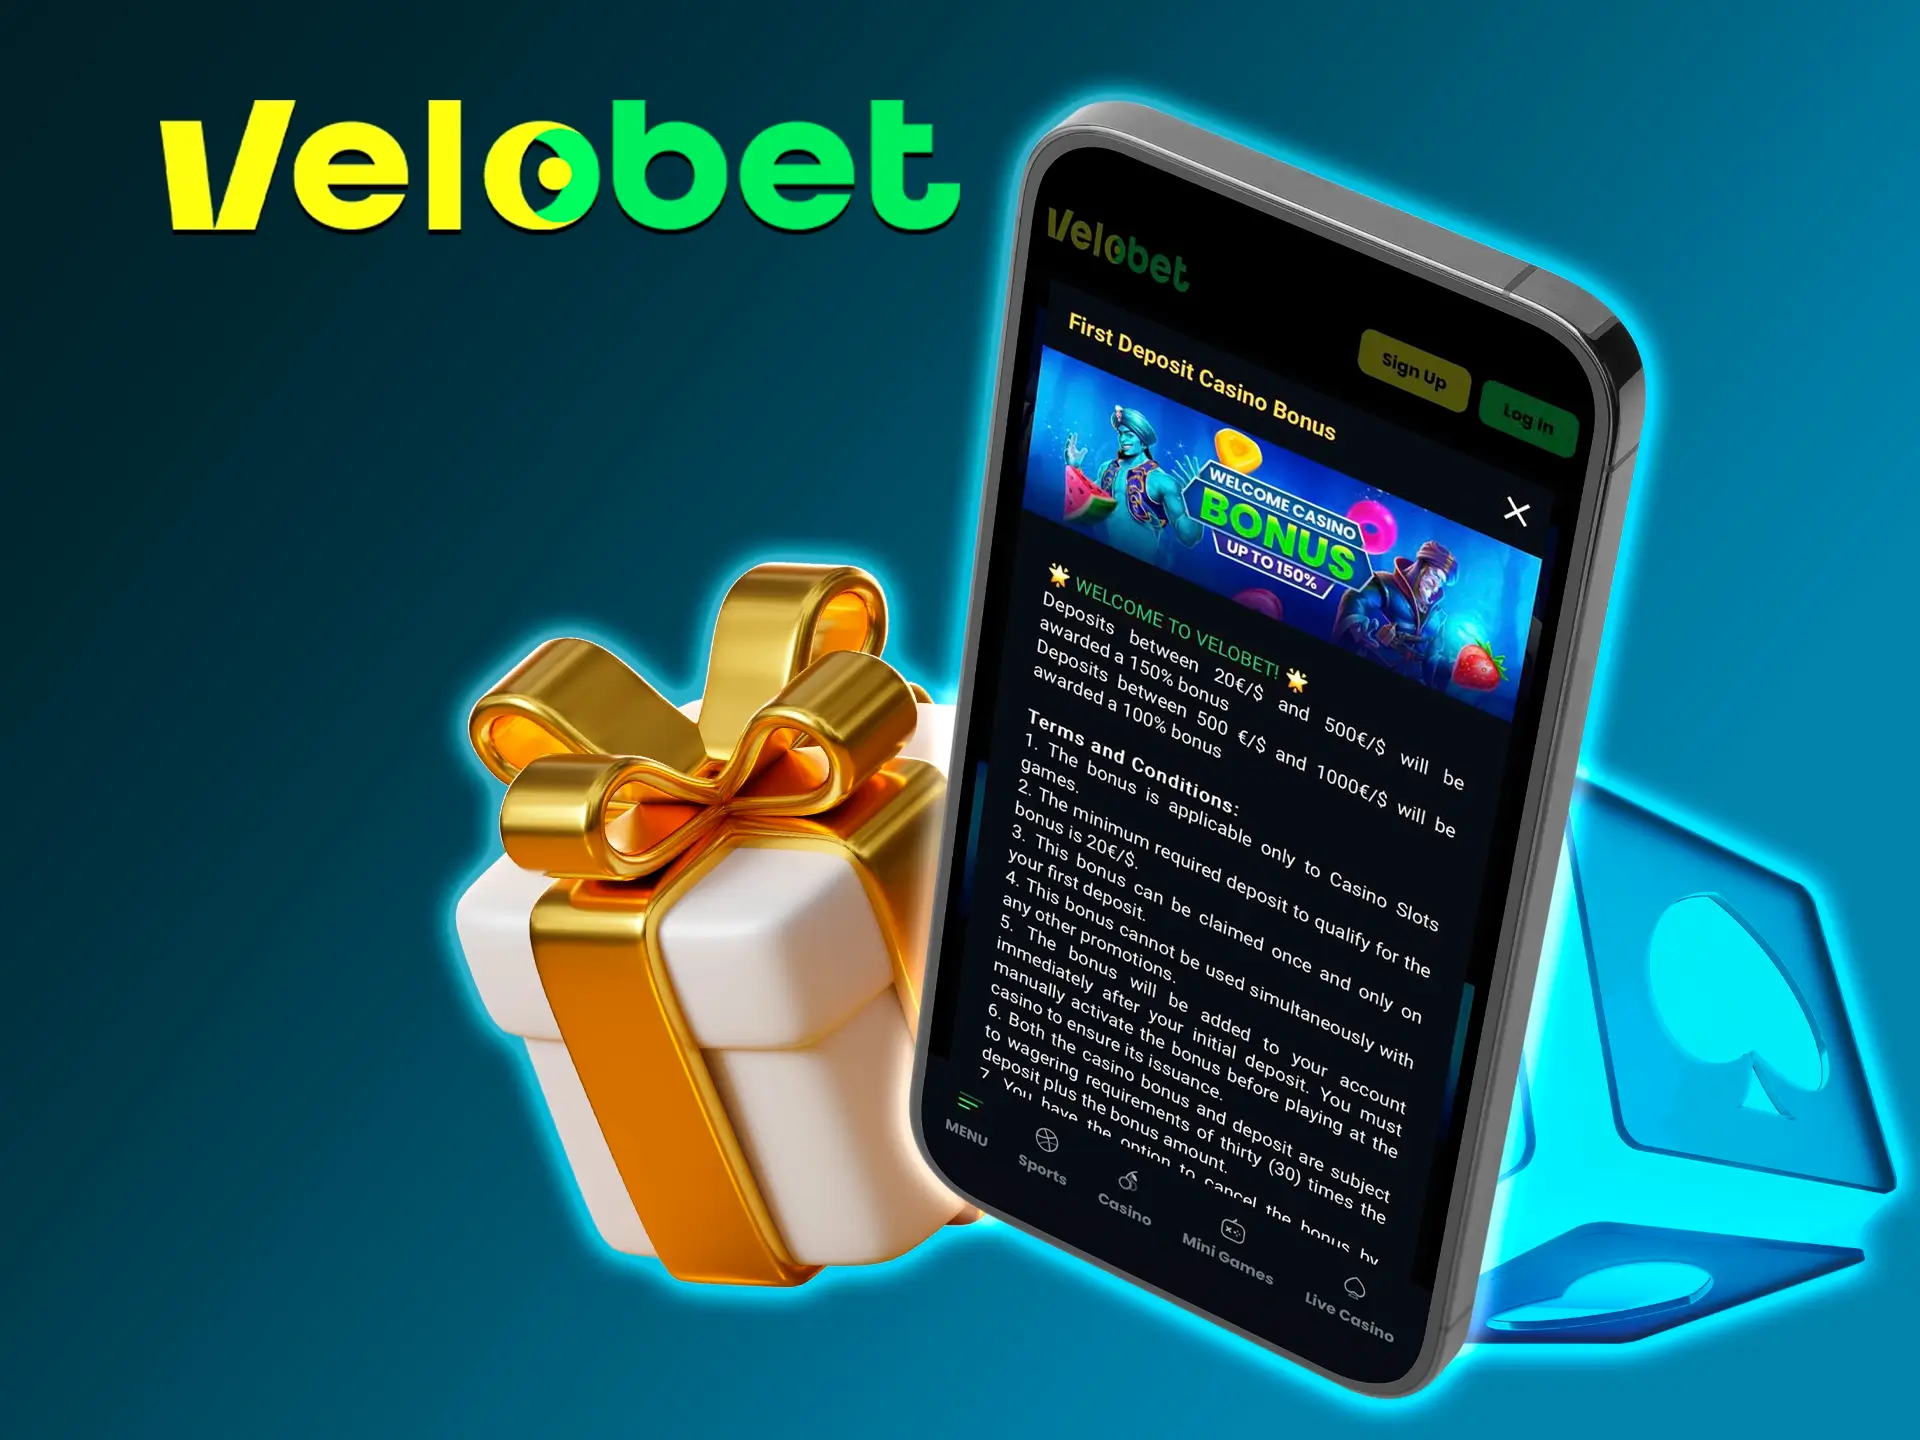 Use the bonus from Velobet Casino to big up your first deposit.